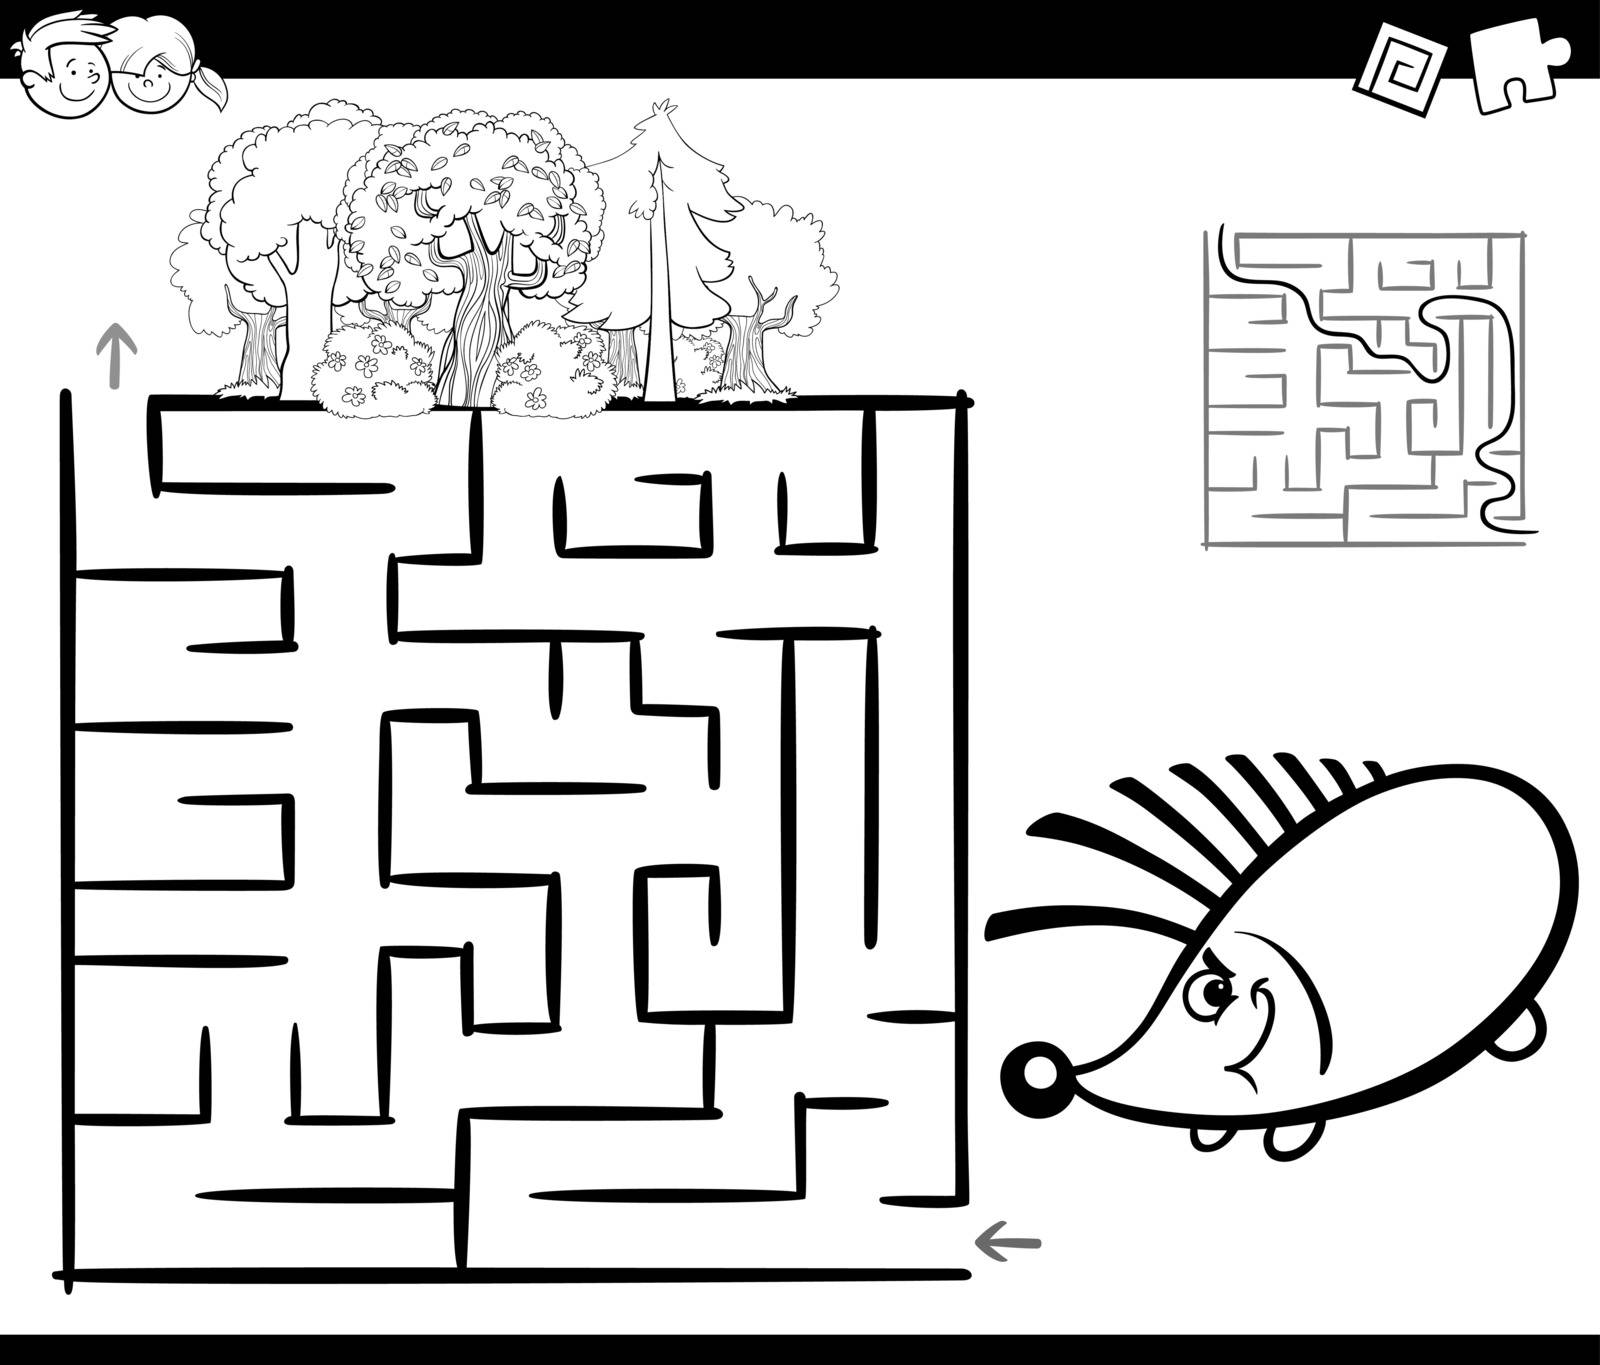 Black and White Cartoon Illustration of Education Maze or Labyrinth Game for Children with Hedgehog and Forest Coloring Page